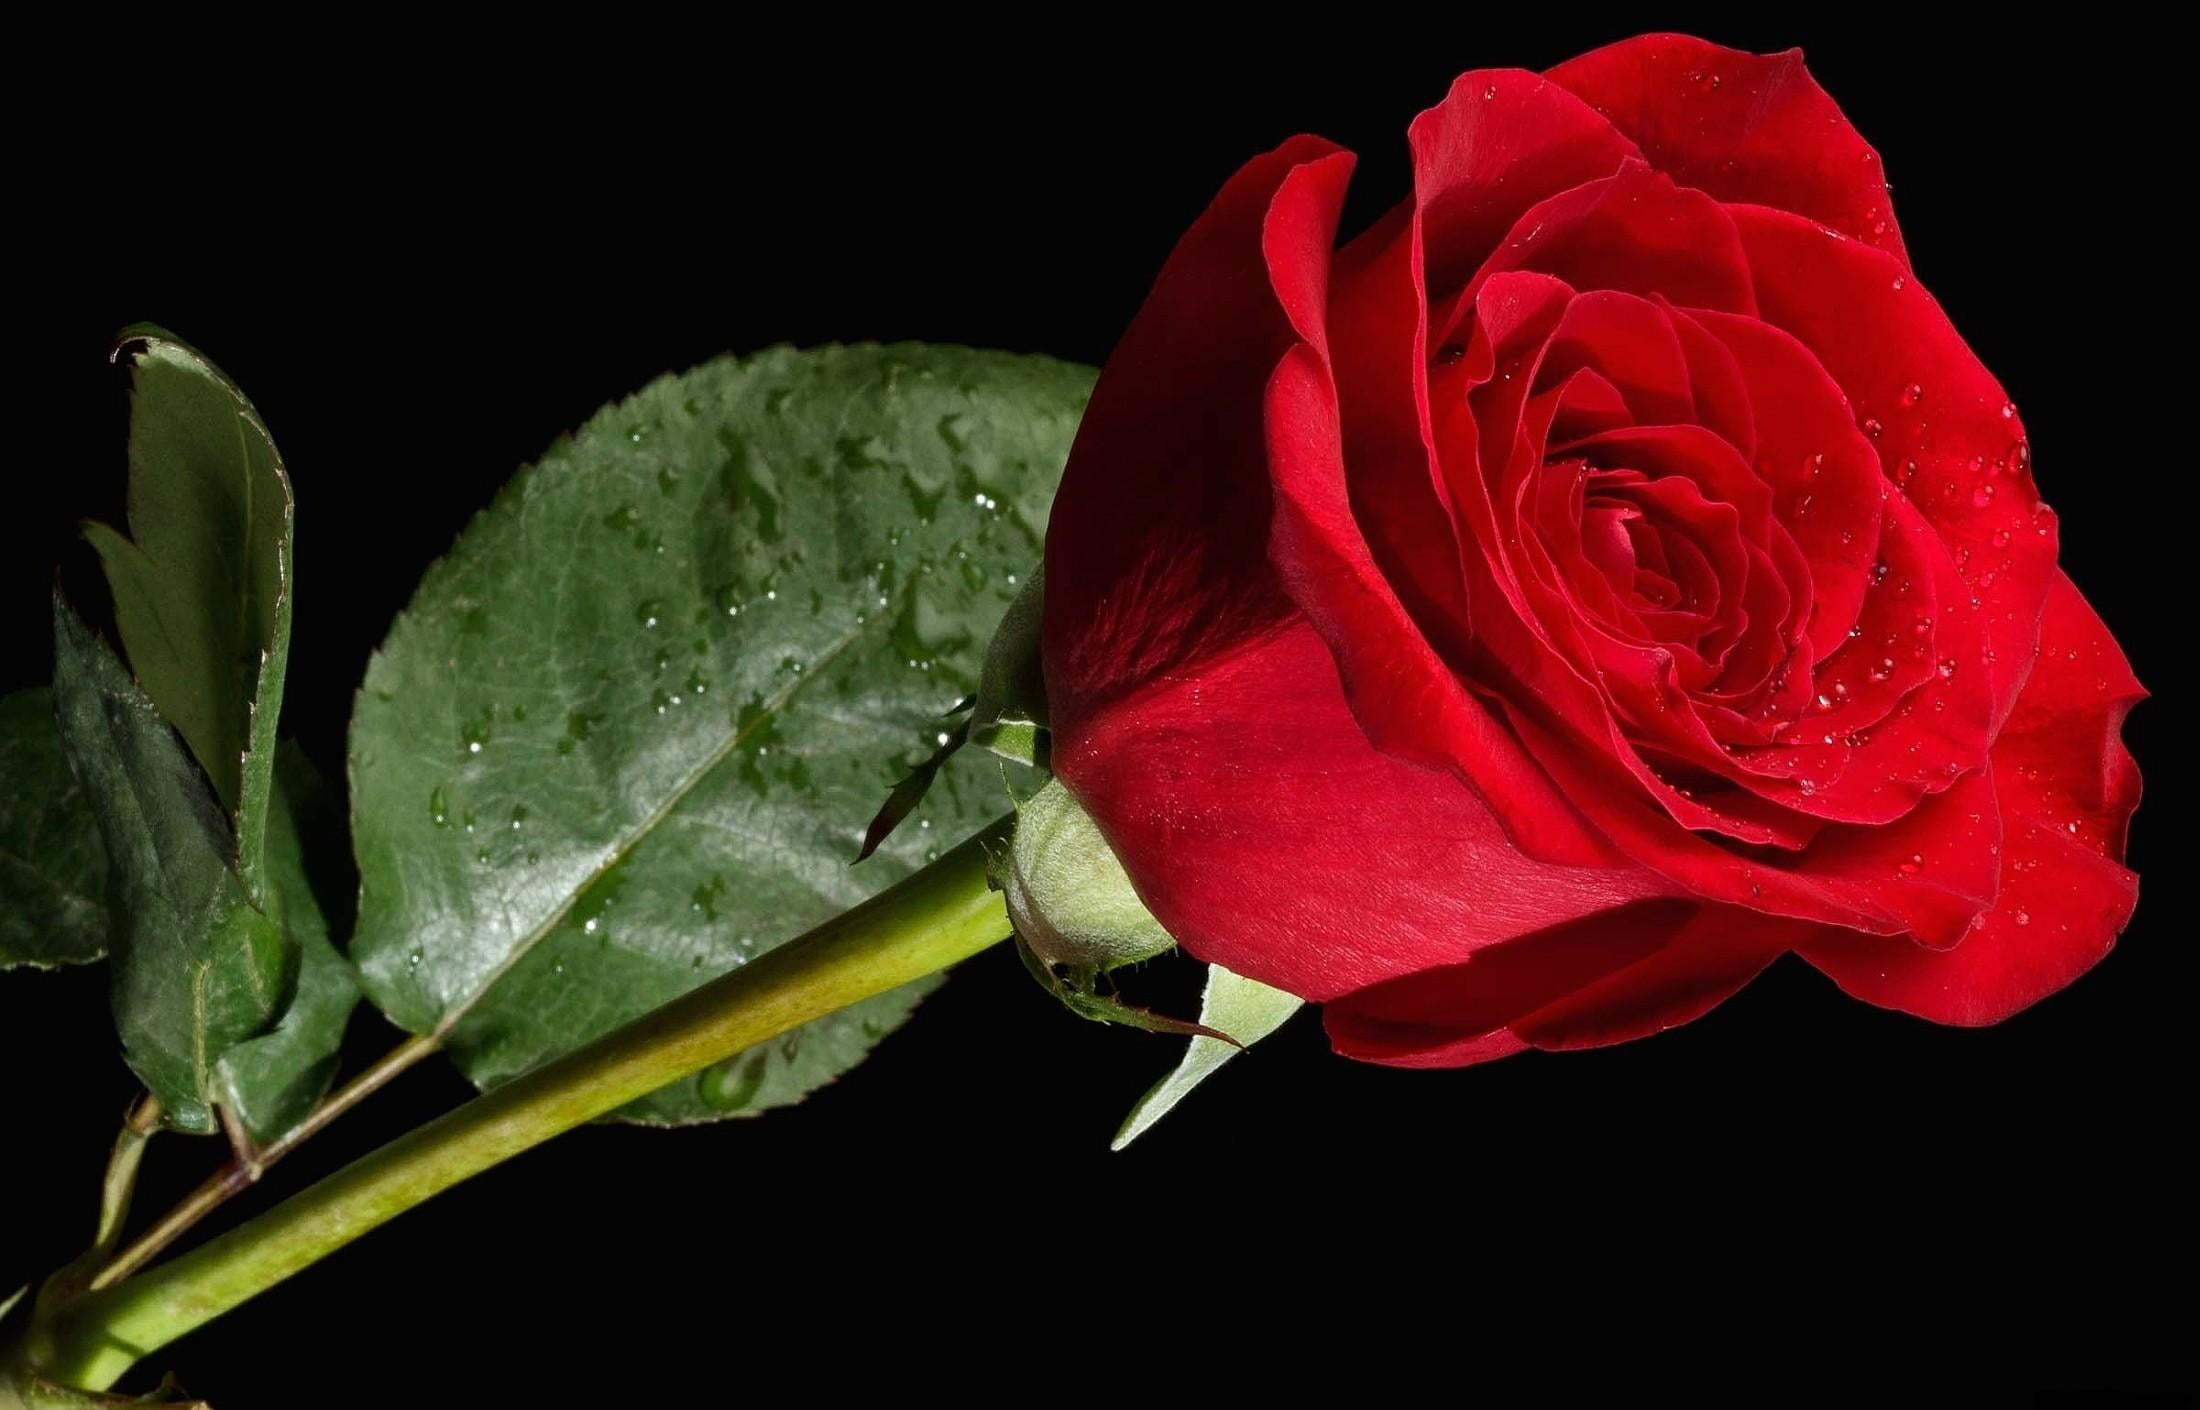 Red Rose Flowers With Black Background - HD Wallpaper 